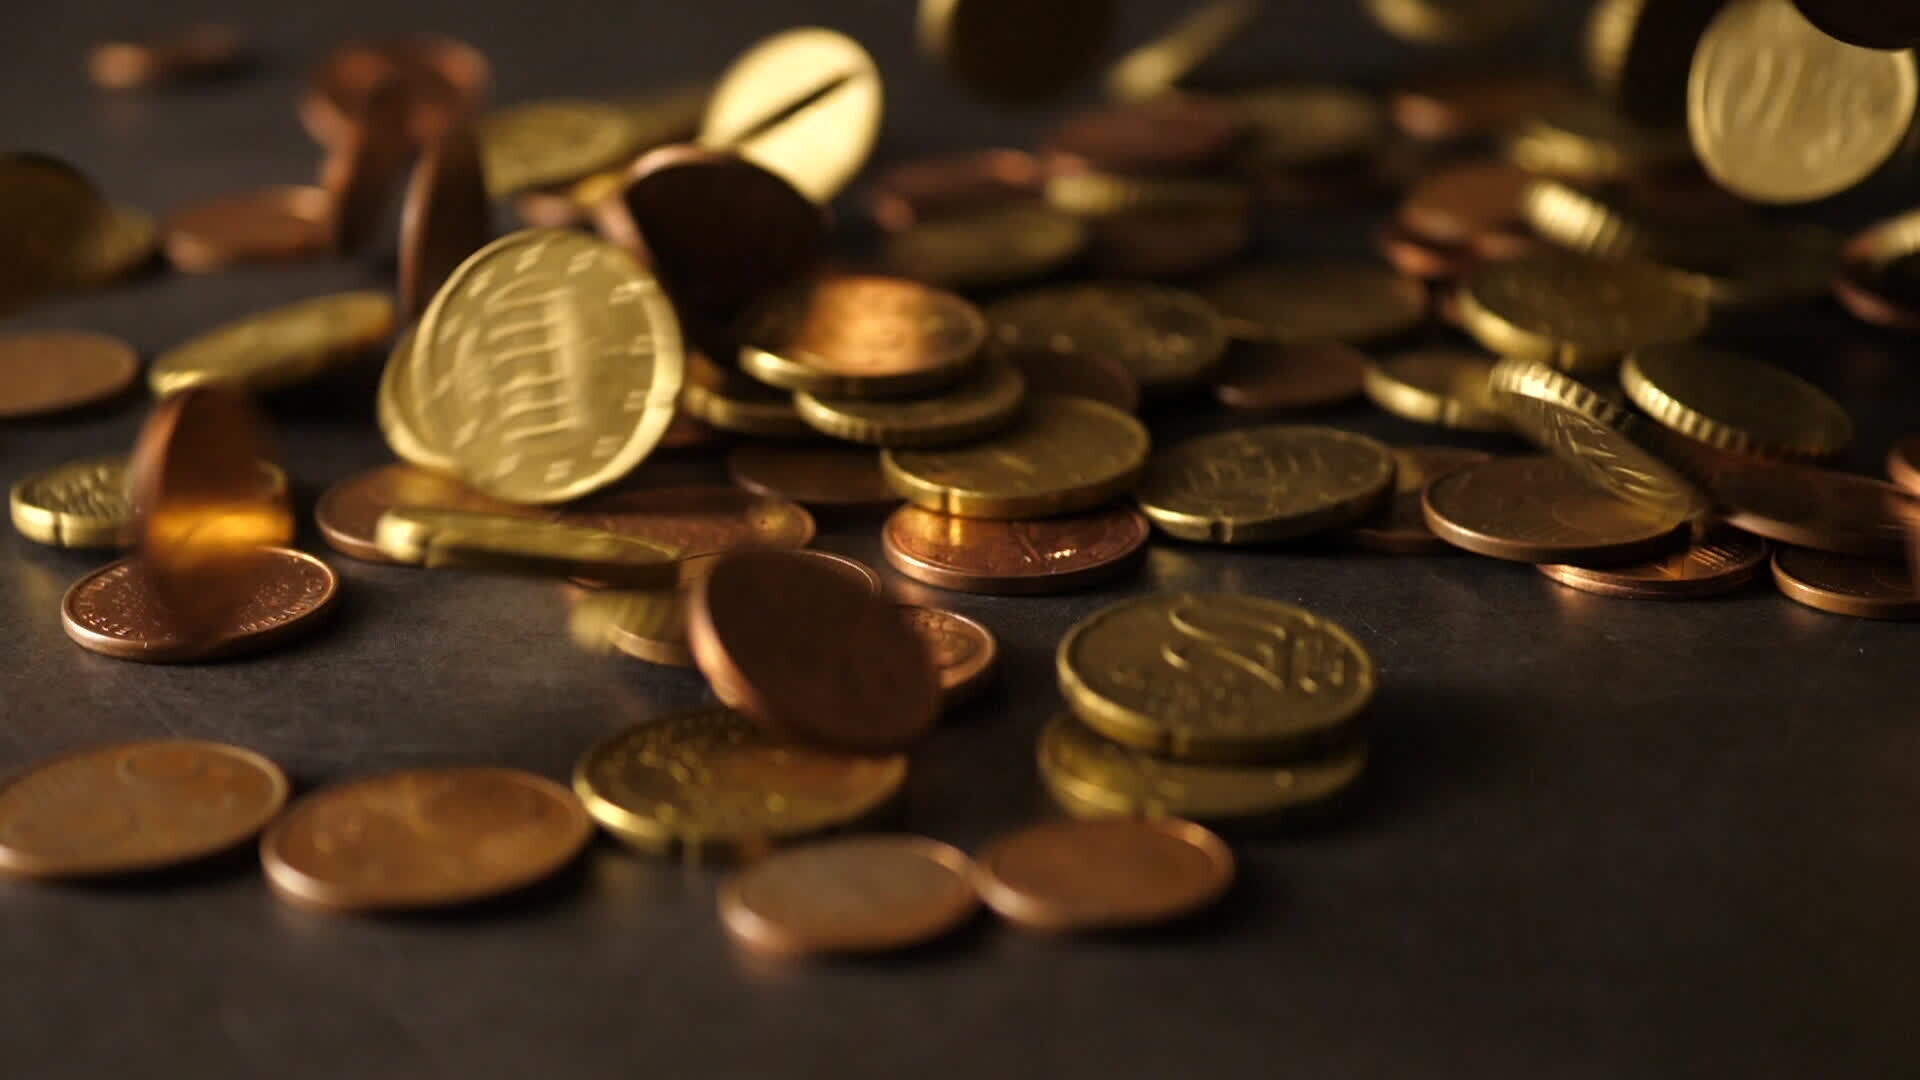 Gold Coins: A round piece of metal used as money, Issued by the authority of a government, A denomination. 1920x1080 Full HD Wallpaper.